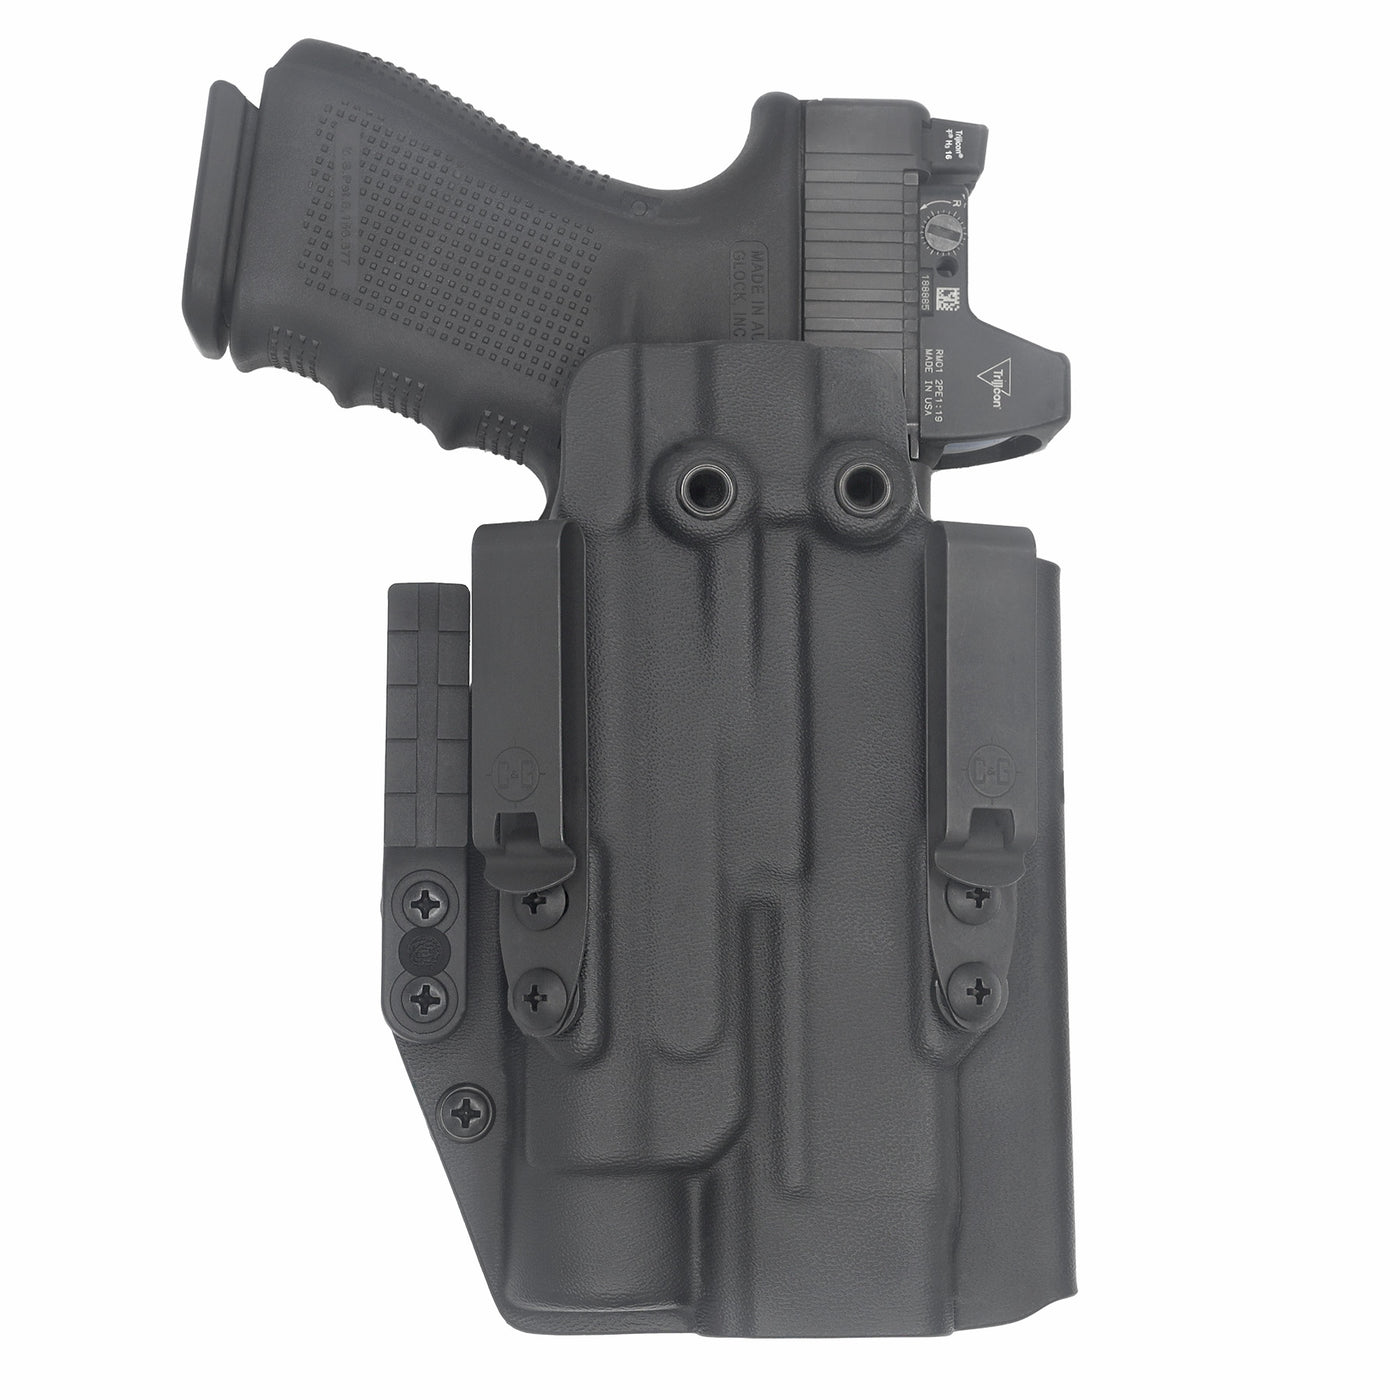 C&G Holsters custom IWB Tactical ALPHA UPGRADE Glock 20/21 Streamlight TLR1 in holstered position